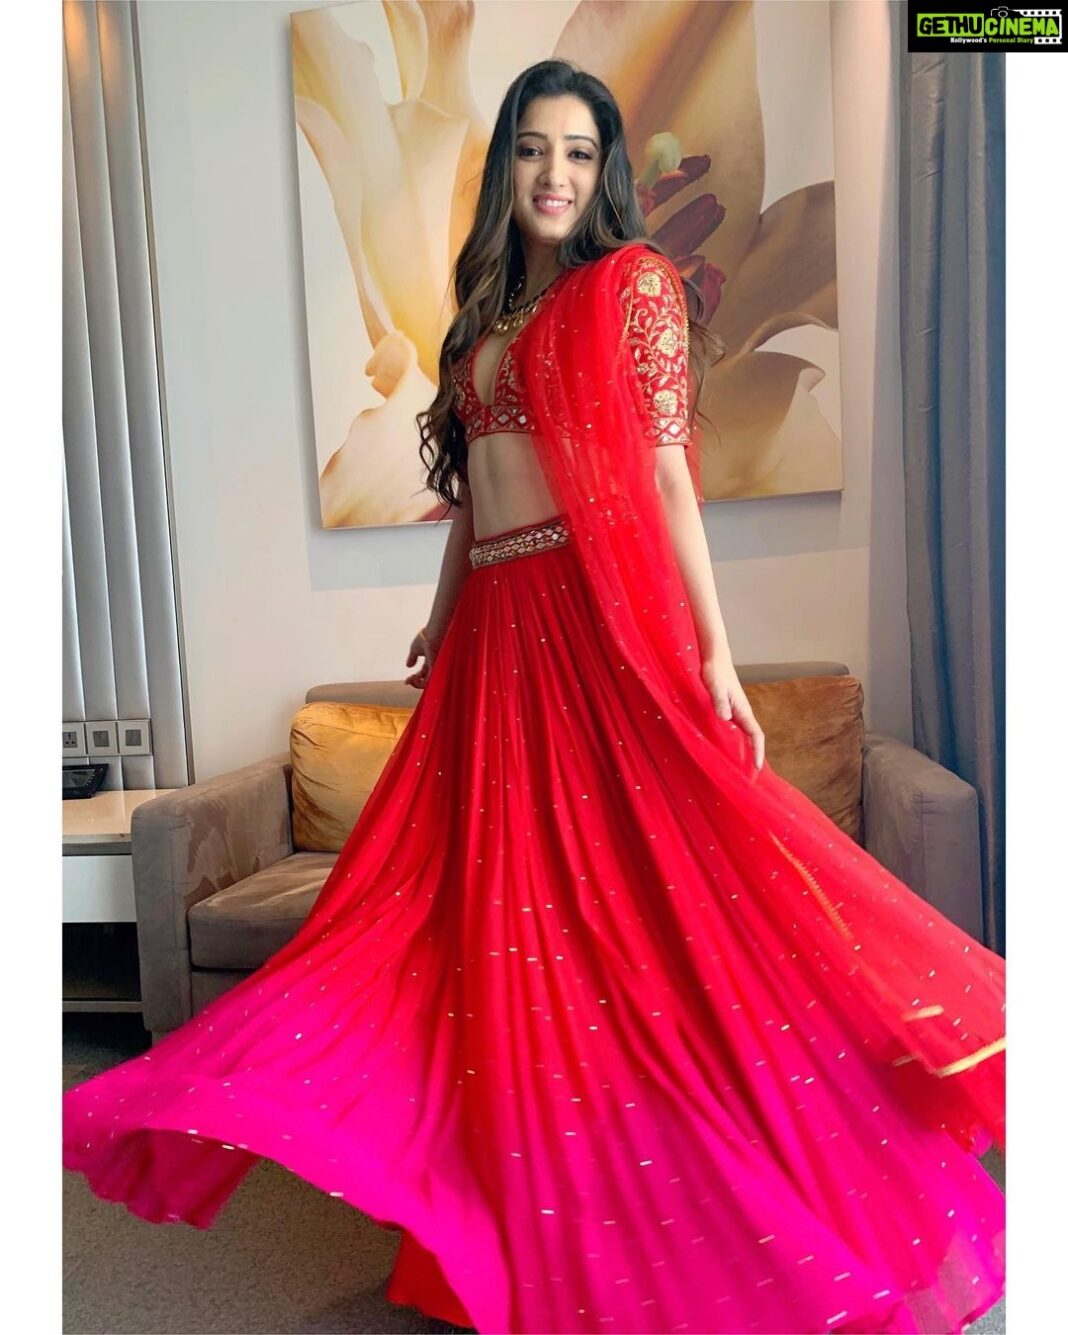 Richa Panai Instagram - For @hi_life_exhibition inauguration today at Hyderabad! It’s happening on 29th and 30th of august at @novotelhicc So don’t miss out!❤️ Lehnga - @nallamz Jewellery - @perniaspopupshop Makeup and hair - @raghu_makeup_studio and Shankar Event manager - @marksmediacommunications